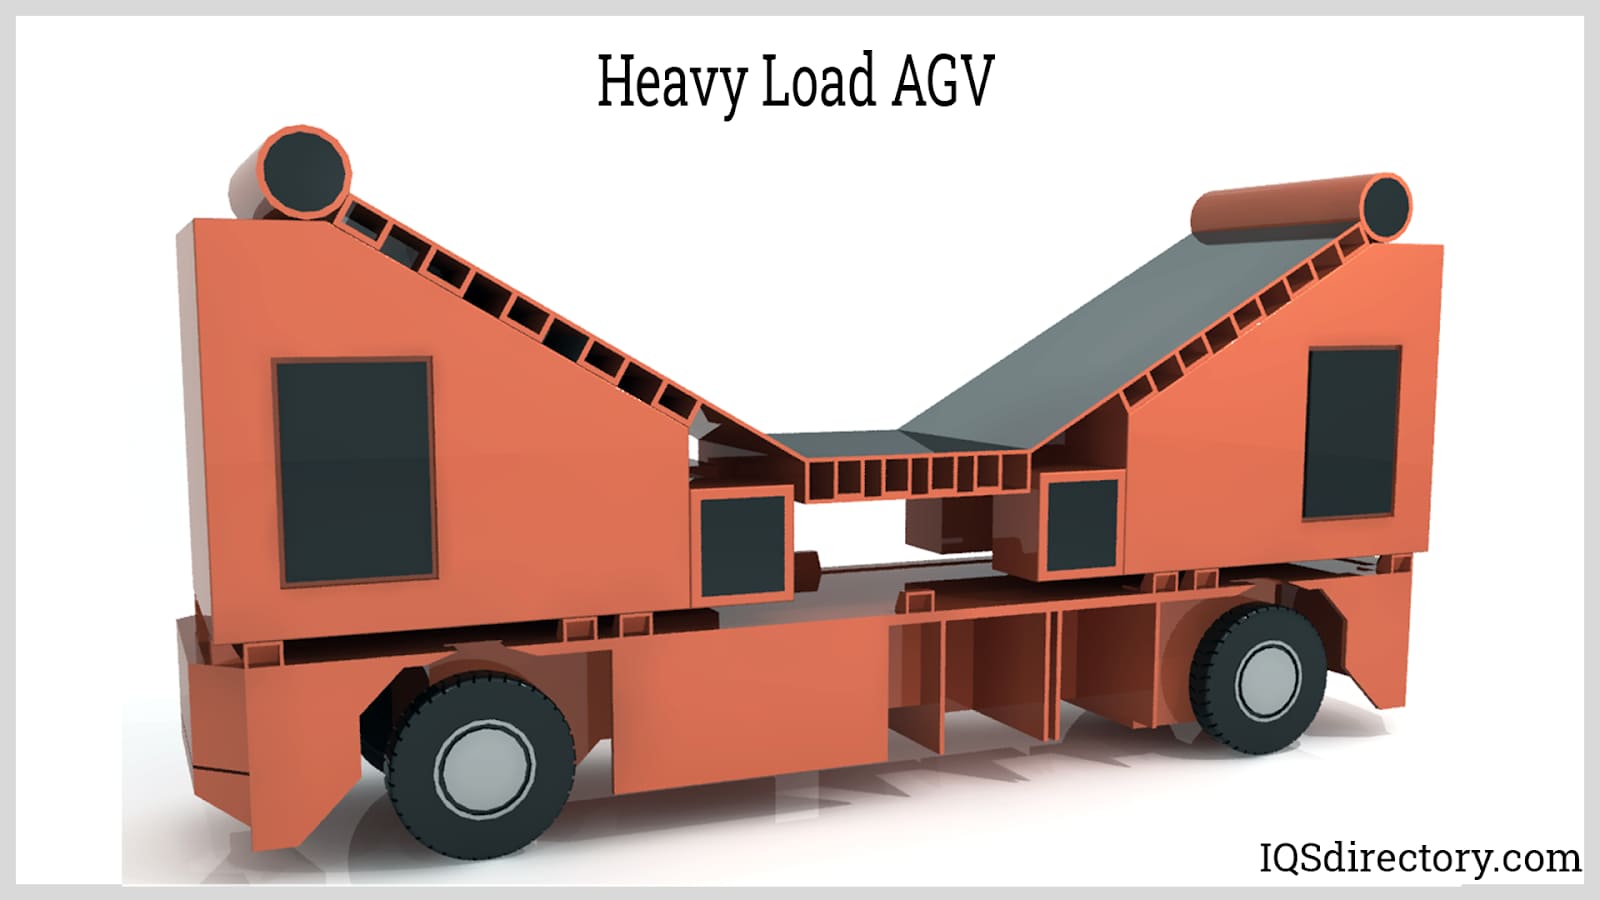 Heavy Load Automated Guided Vehicle